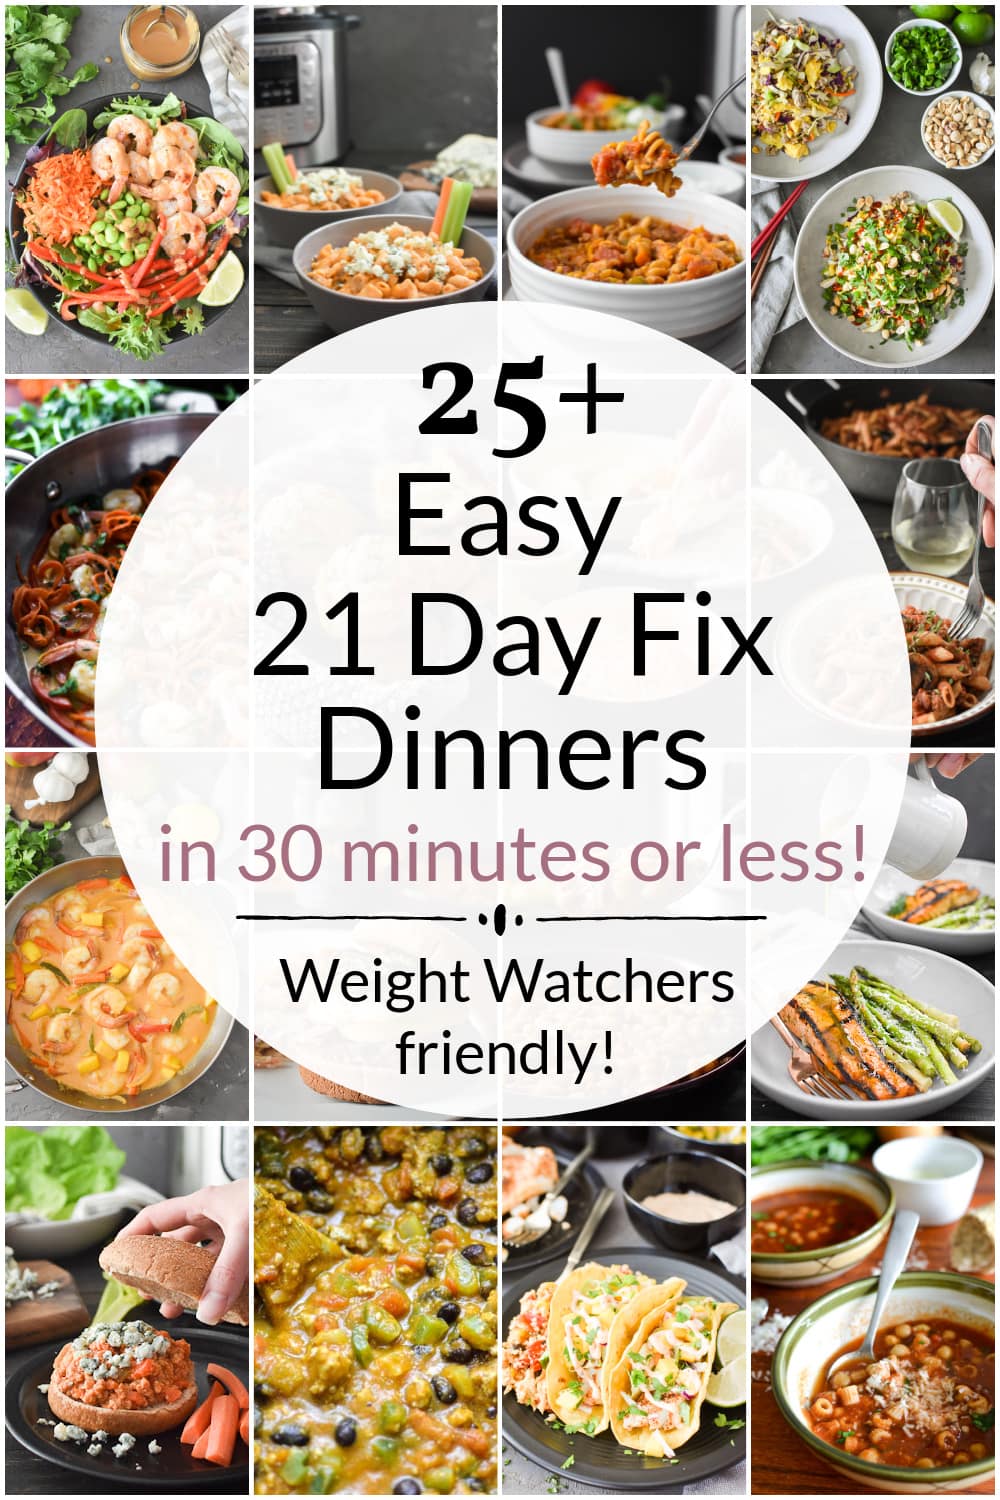 These 21 Day Fix quick dinners are easy, healthy, delicious and ready in 30 minutes or less! Weight Watchers friendly, too! #21dayfix #beachbody #mealplan #mealprep #healthy #newyearnewyou #weightwatchers #kidfriendly #ww #personalpoints #healthydinner #dinner #quickmeal #quickdinner